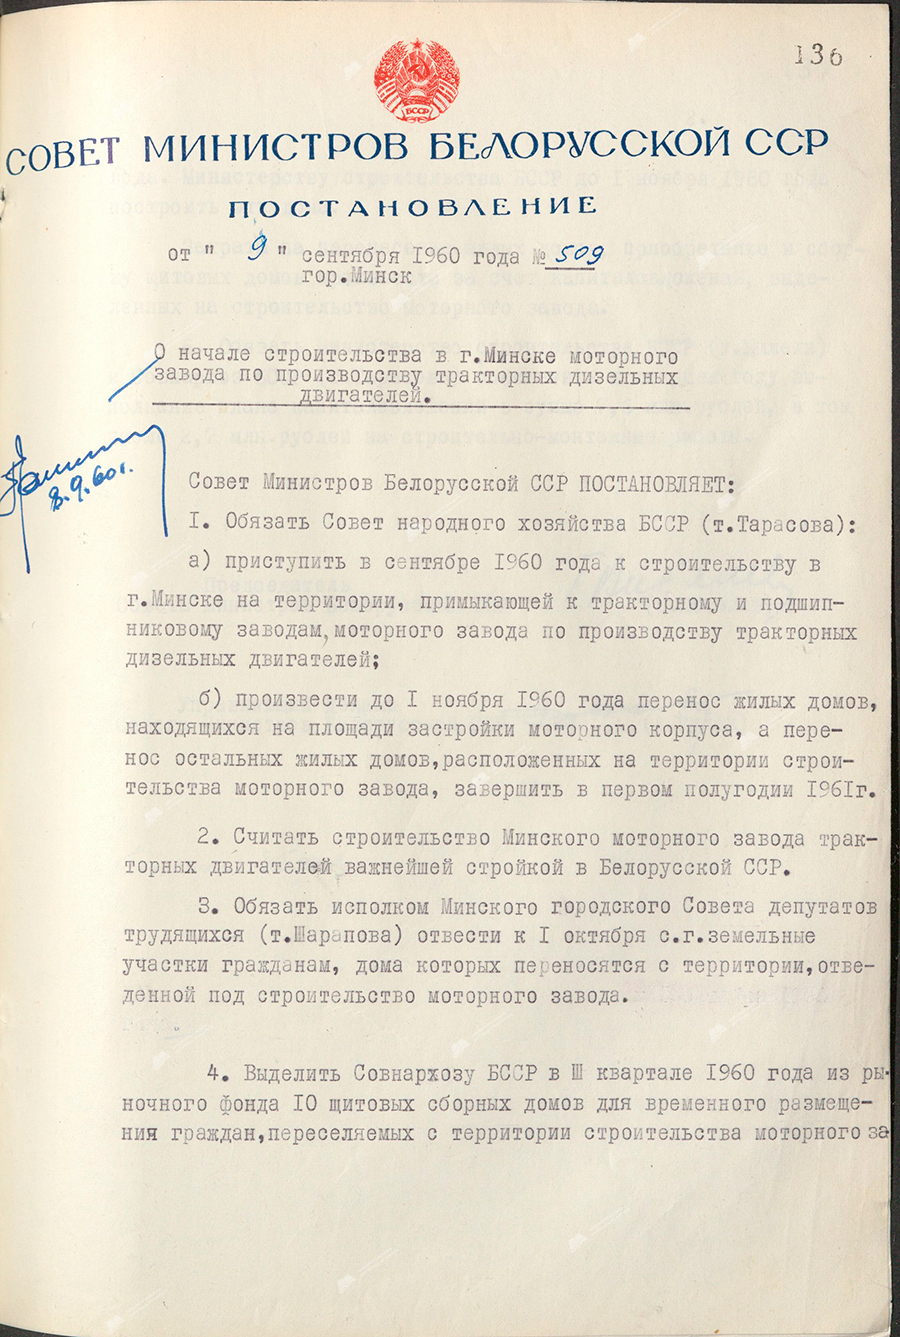 Resolution No. 509 of the Council of Ministers of the BSSR «On the start of construction in Minsk of a motor plant for the production of tractor diesel engines»-стр. 0